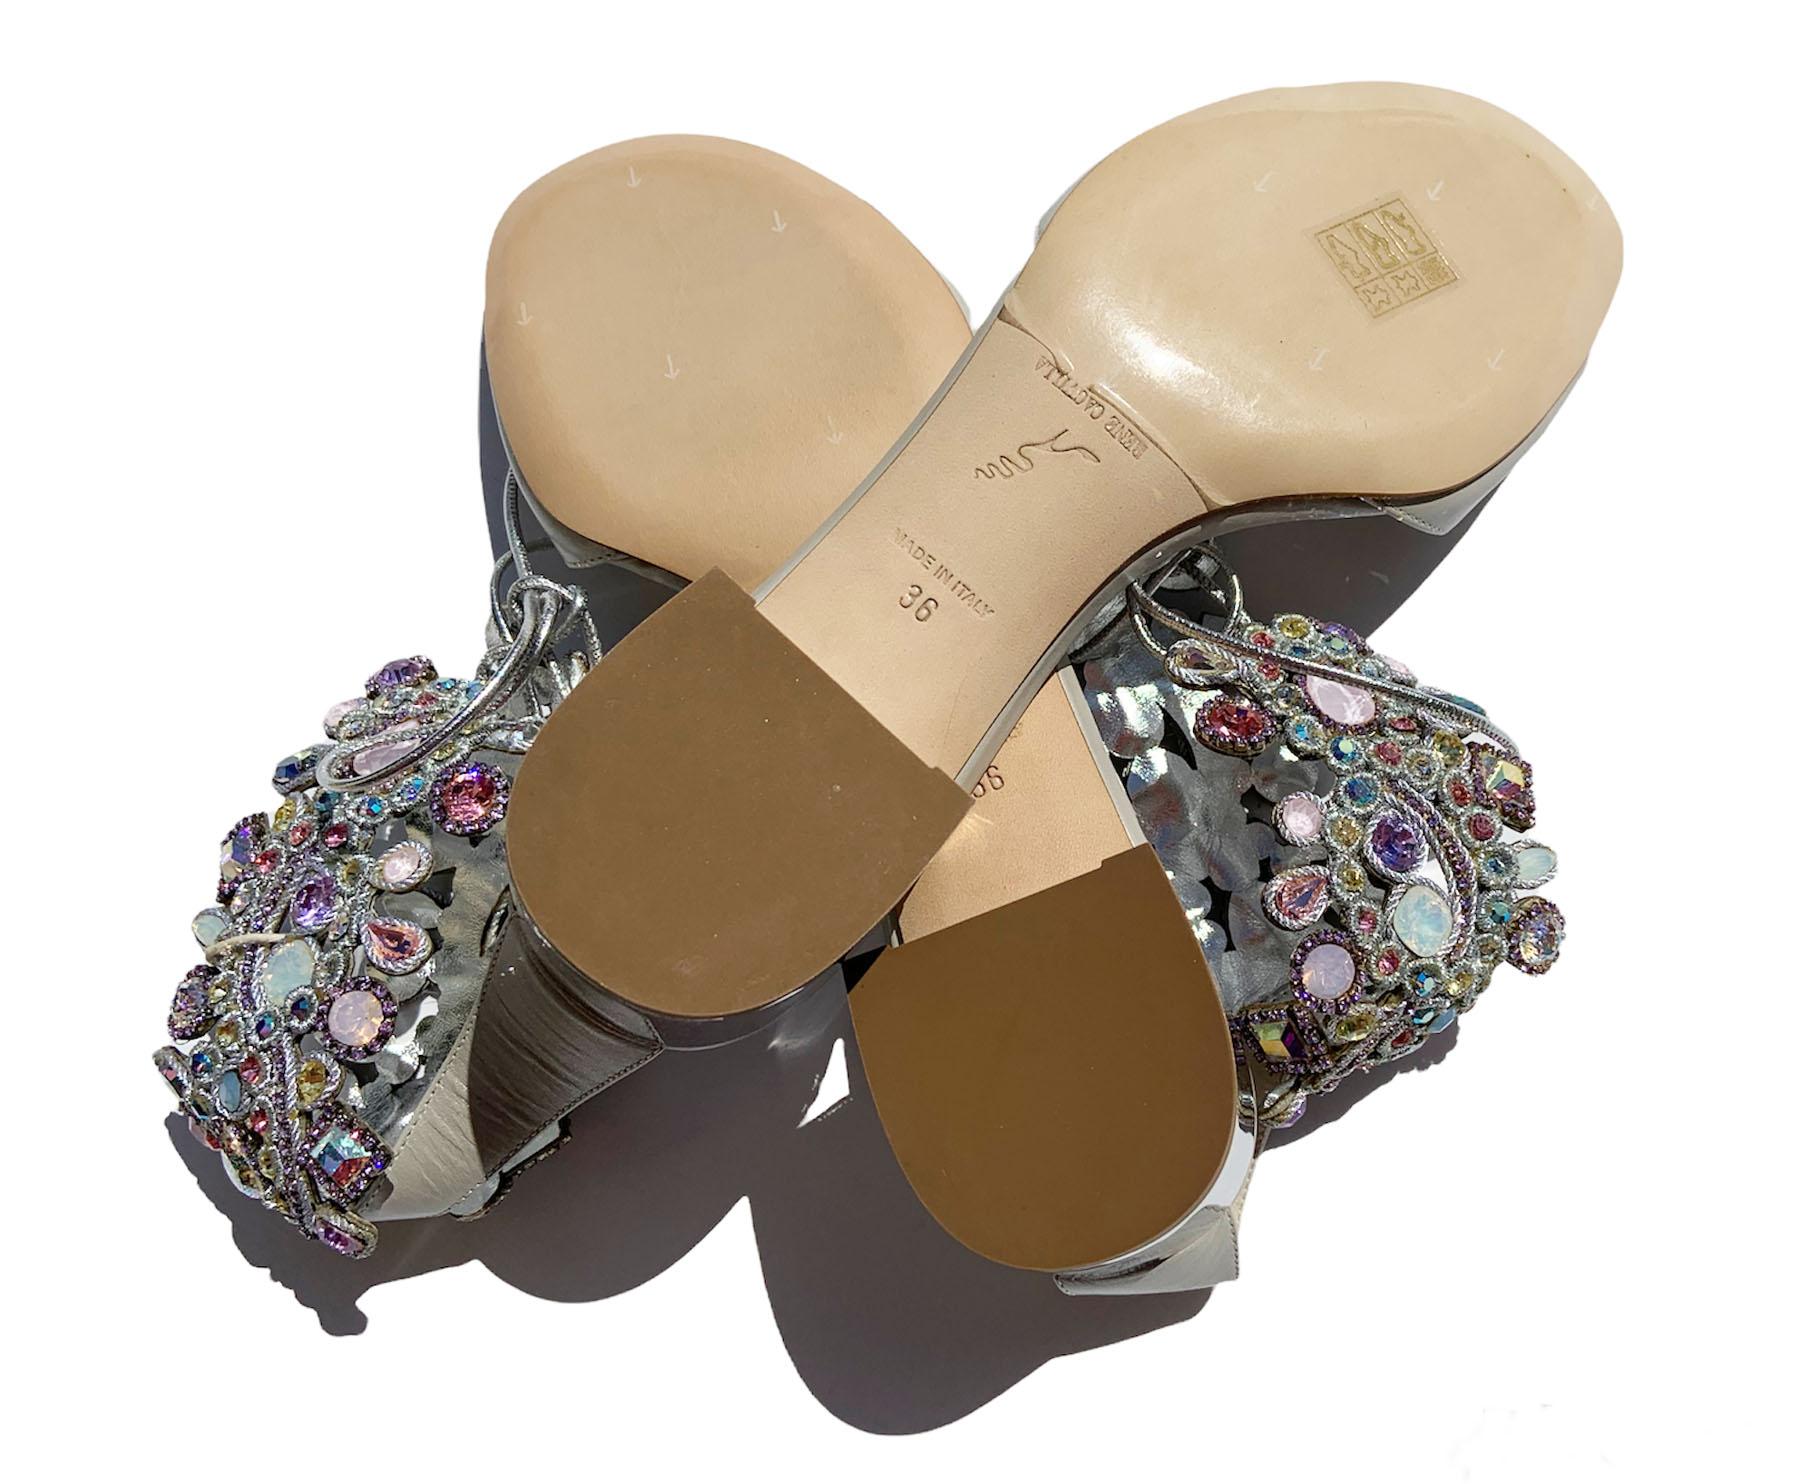 New Rene Caovilla Veneziana Leather Gray Jeweled Ankle Flats Shoes 36 37 40 In New Condition For Sale In Montgomery, TX